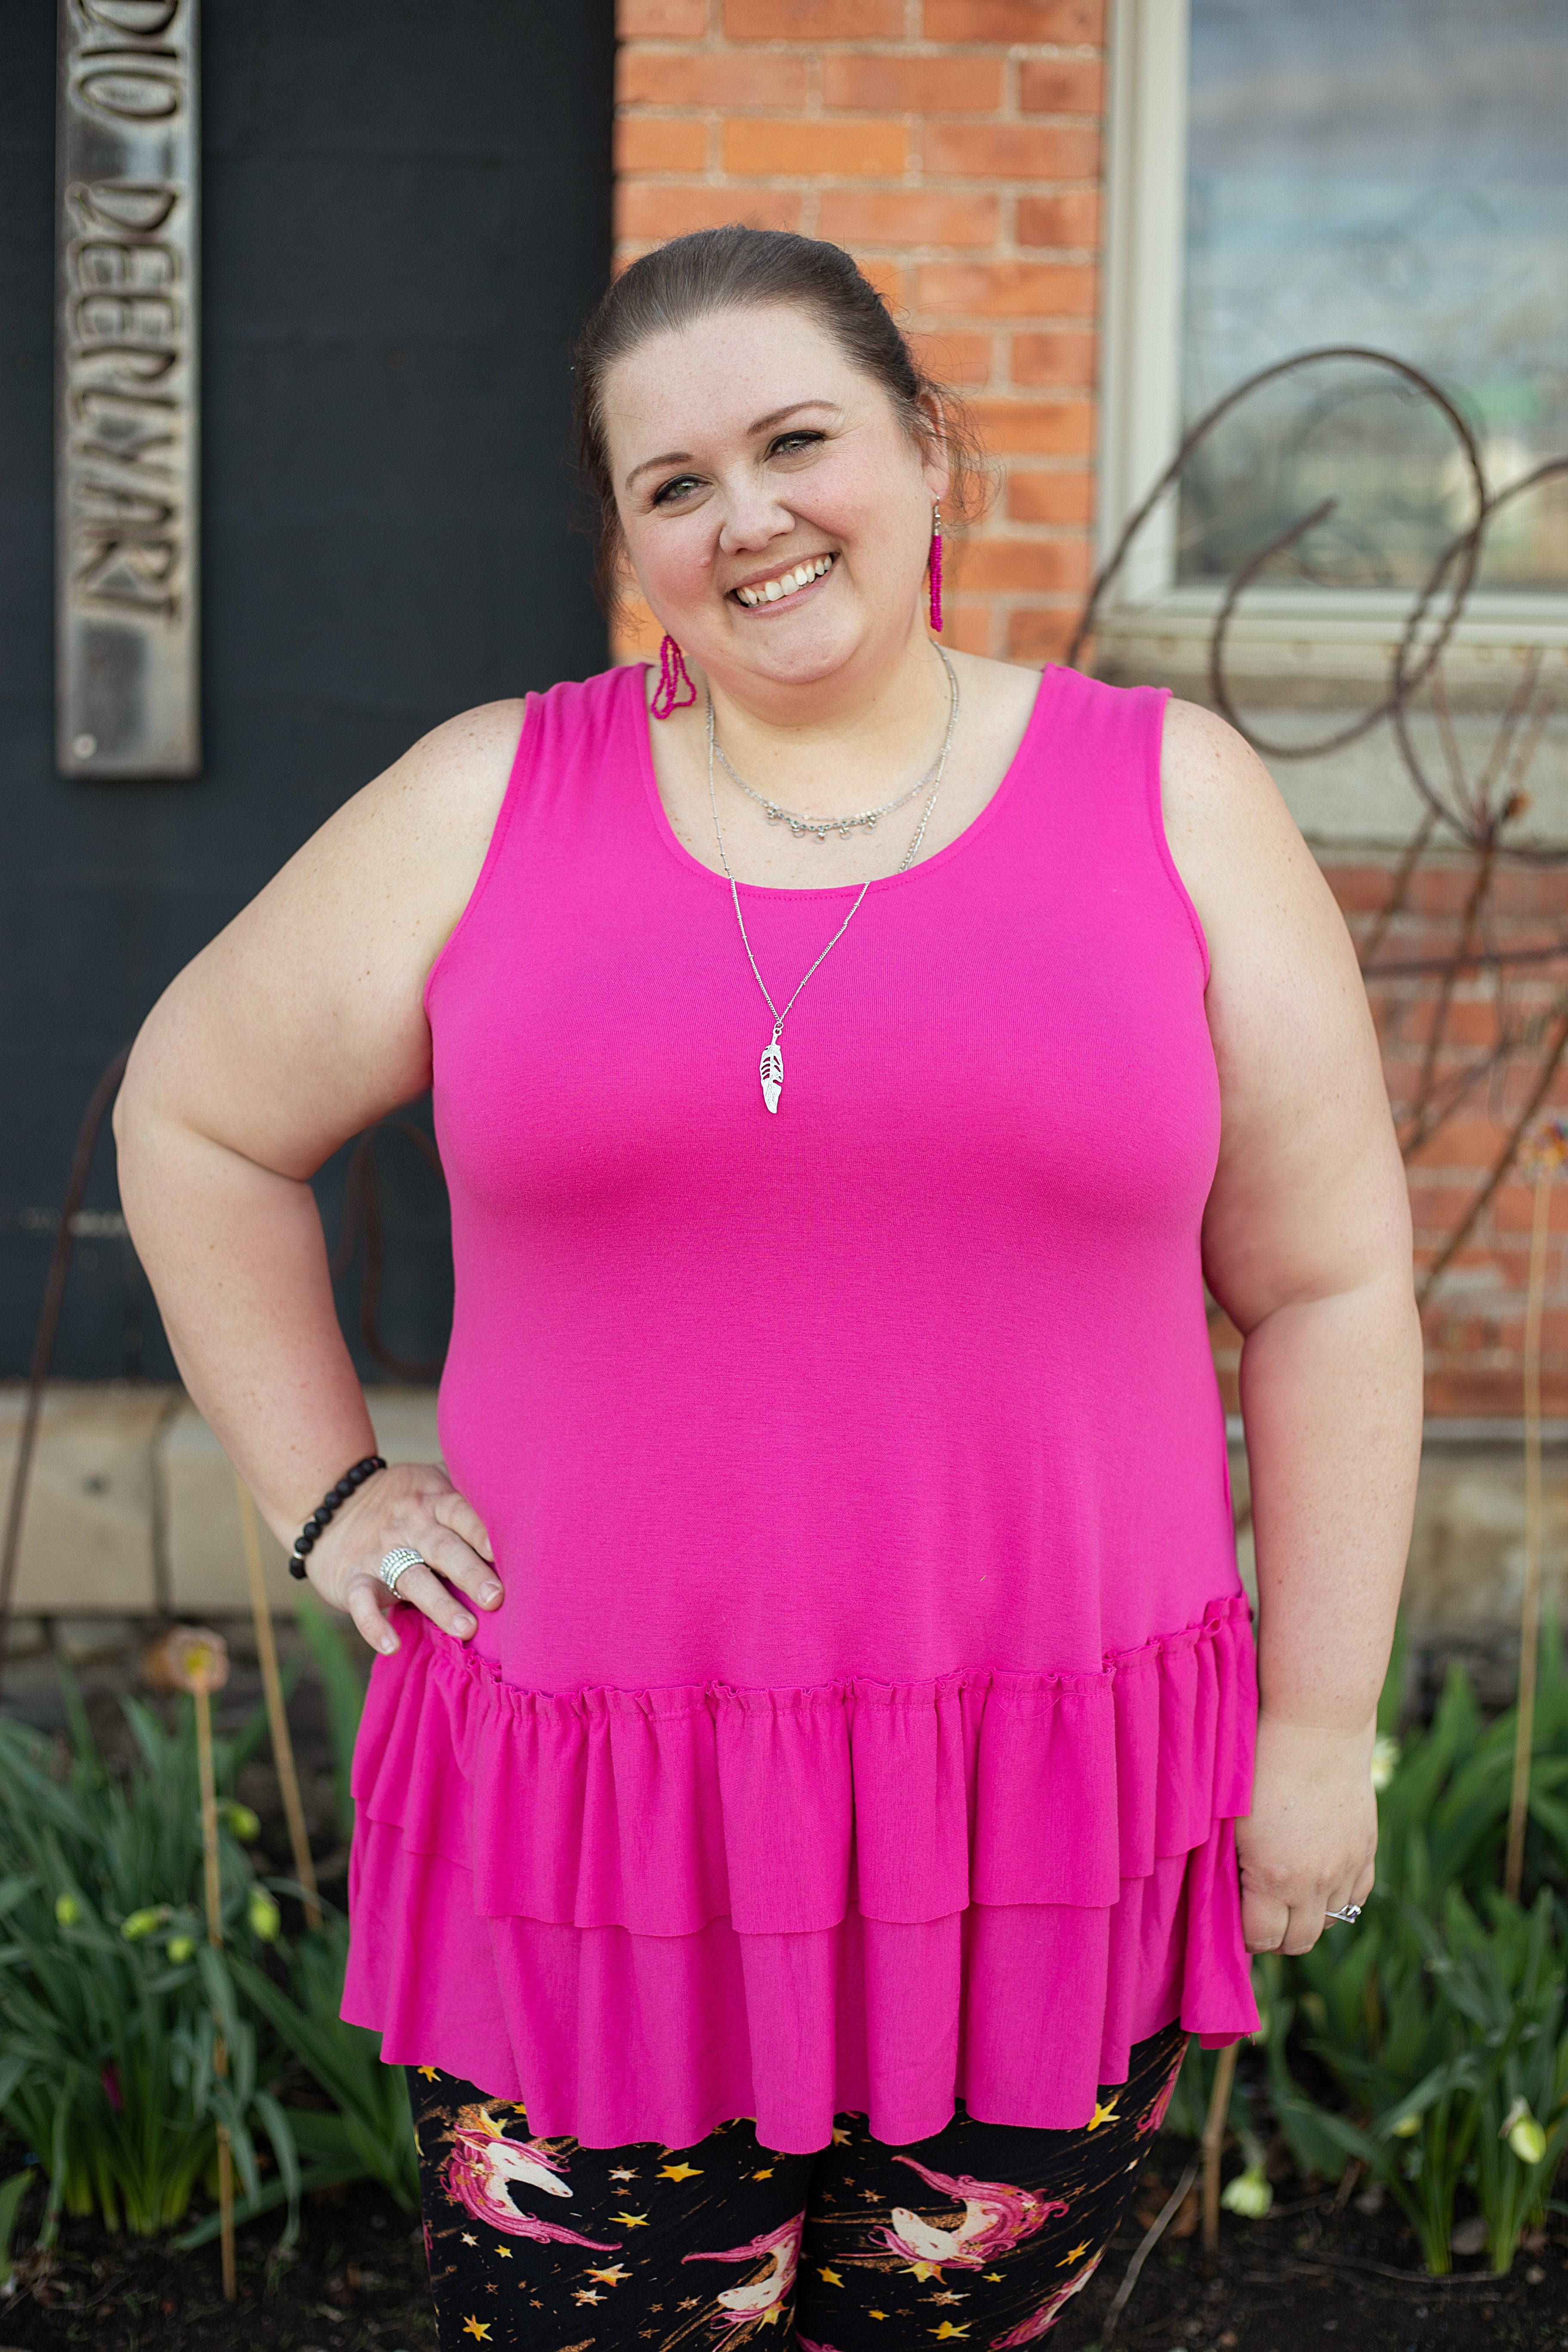 Tiffany Sleeveless Hot Pink Ruffle Top - Twisted Spur Boutique OUTLET